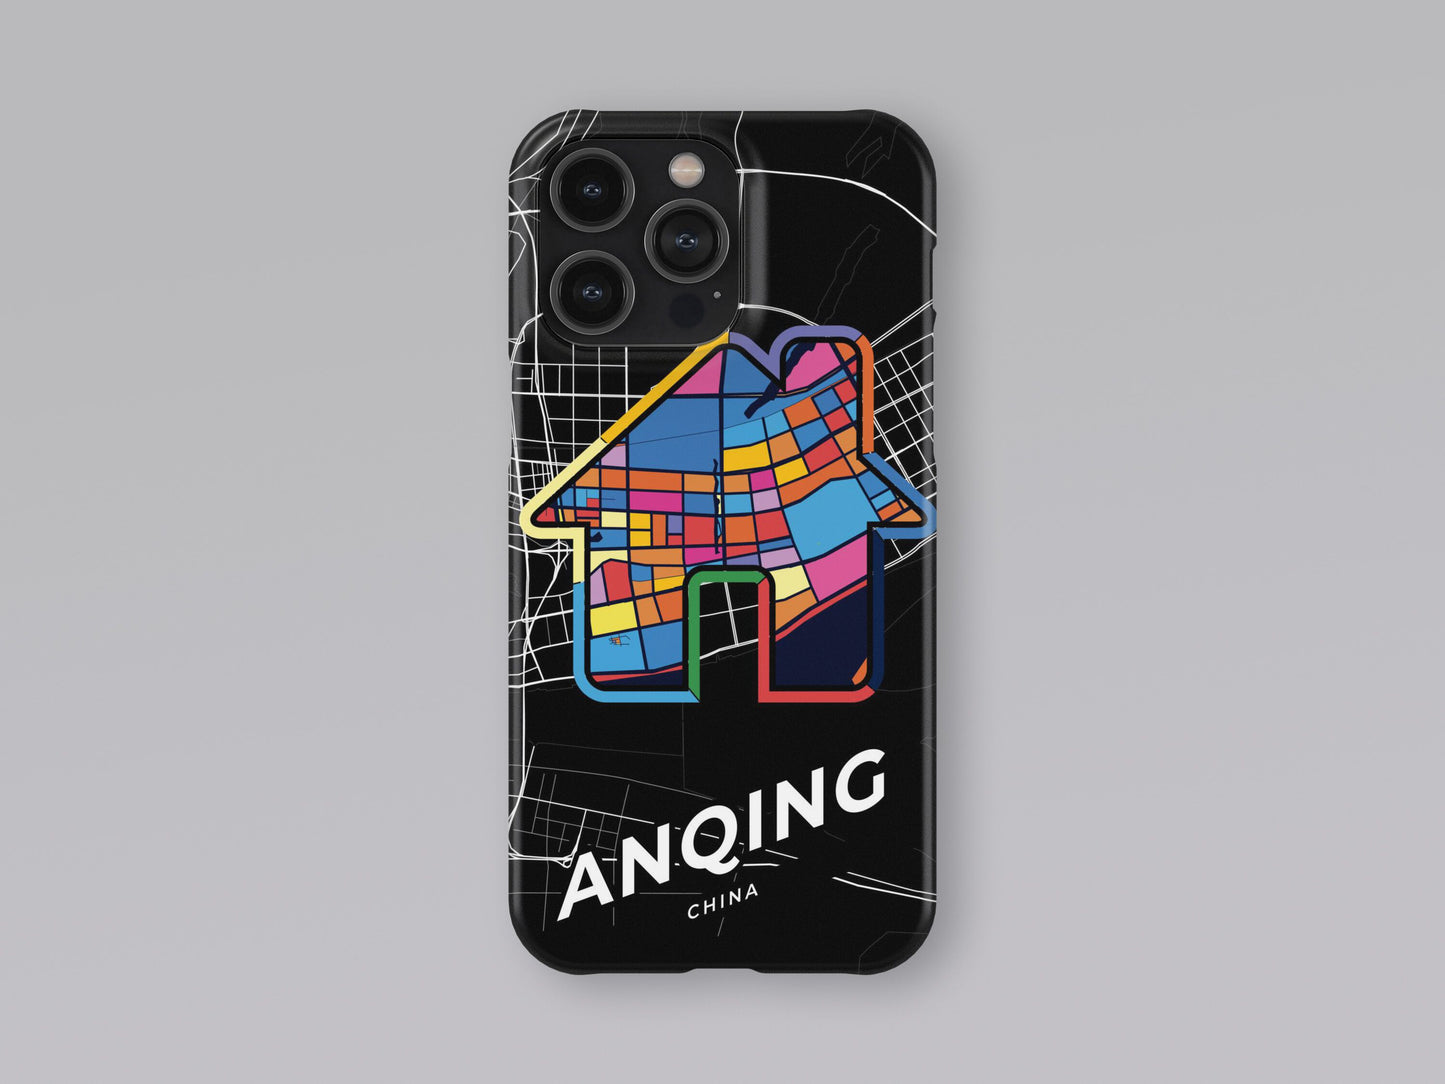 Anqing China slim phone case with colorful icon. Birthday, wedding or housewarming gift. Couple match cases. 3